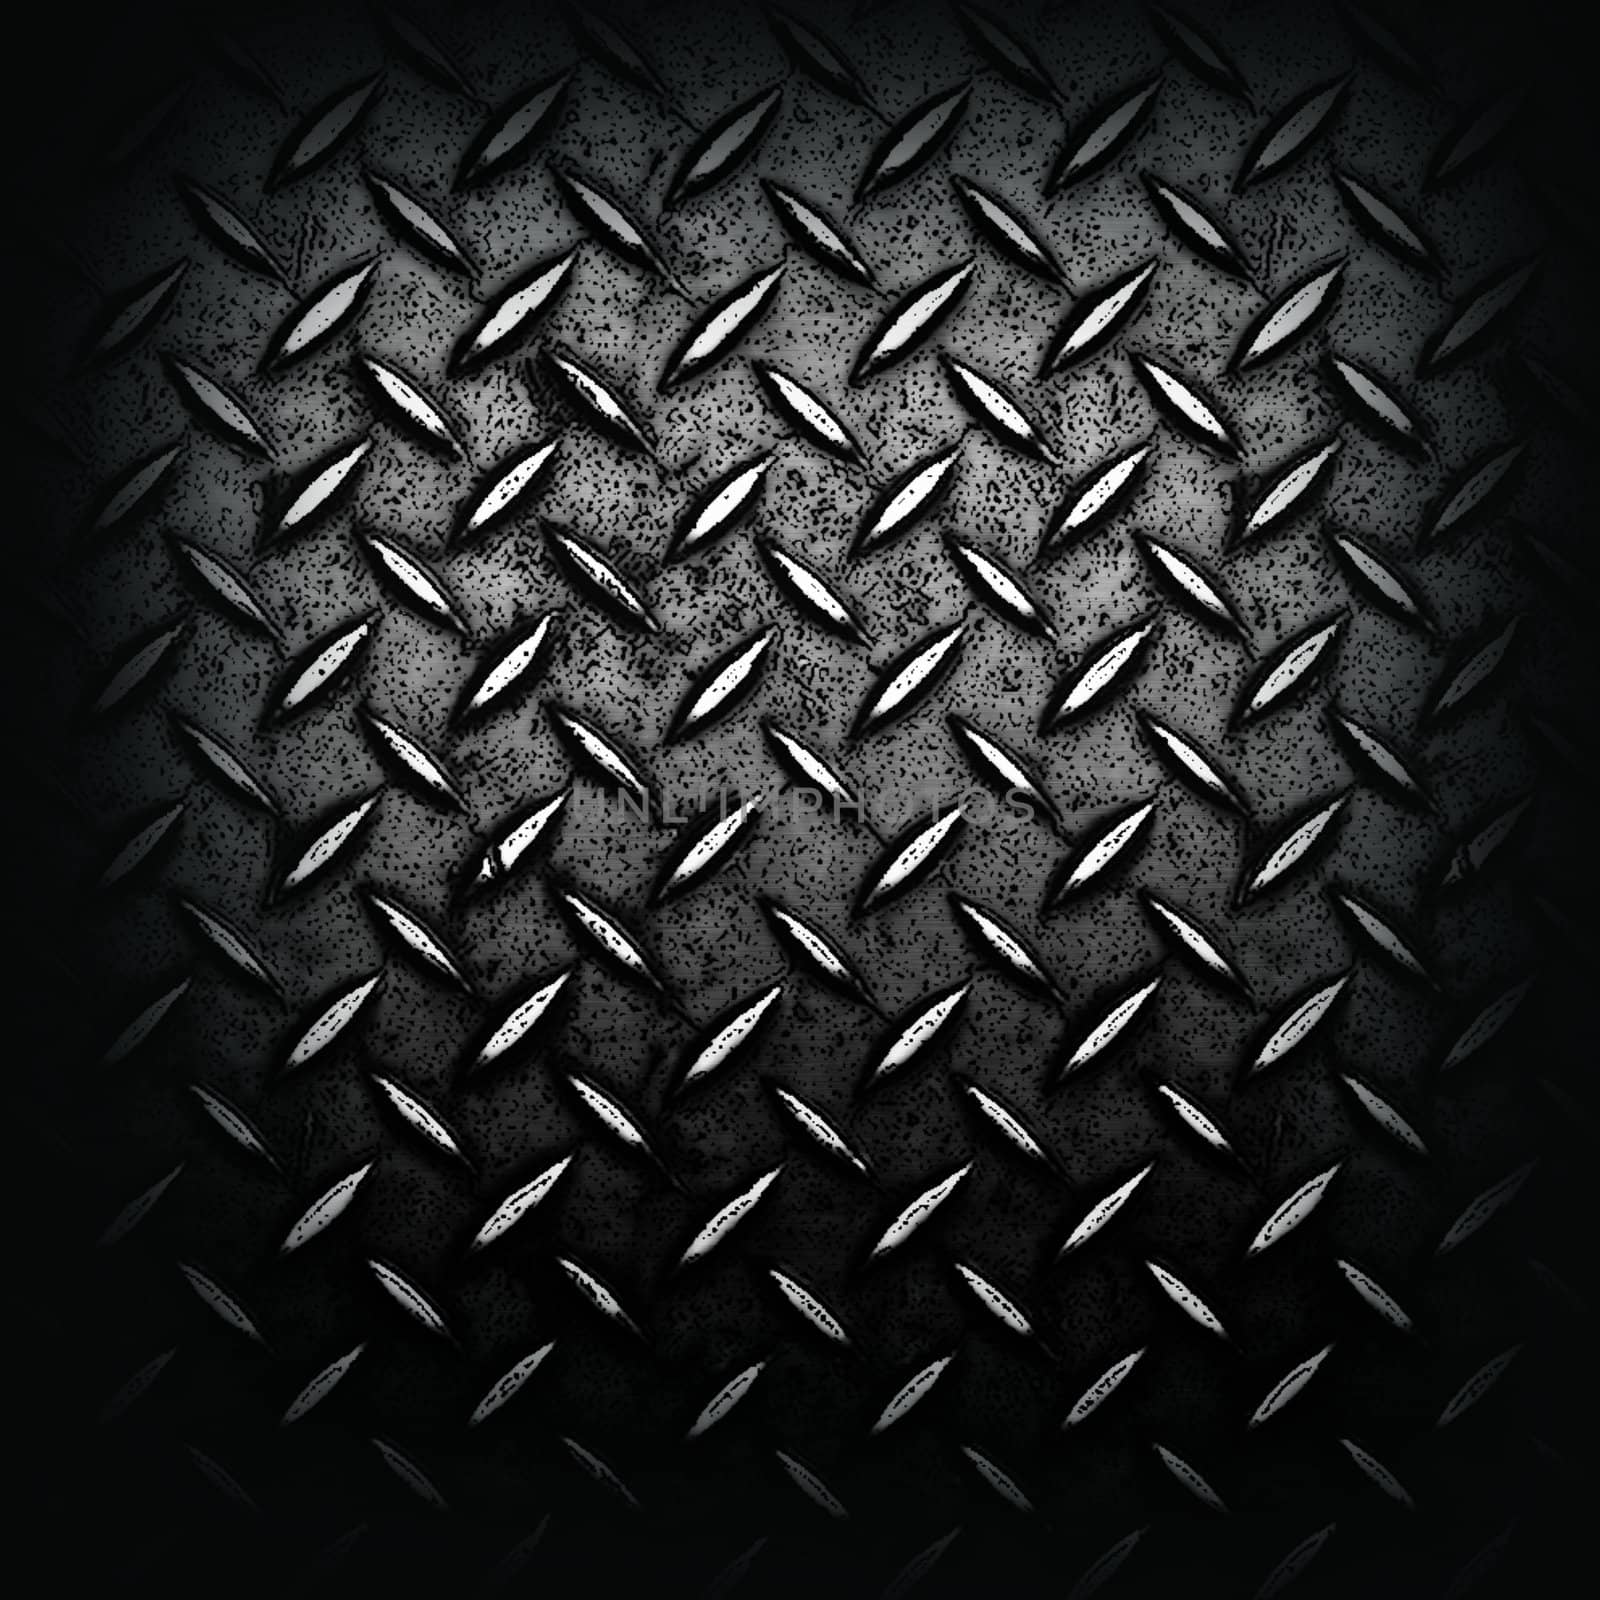 Grunge black diamond plated metal. great for backgrounds and overlays